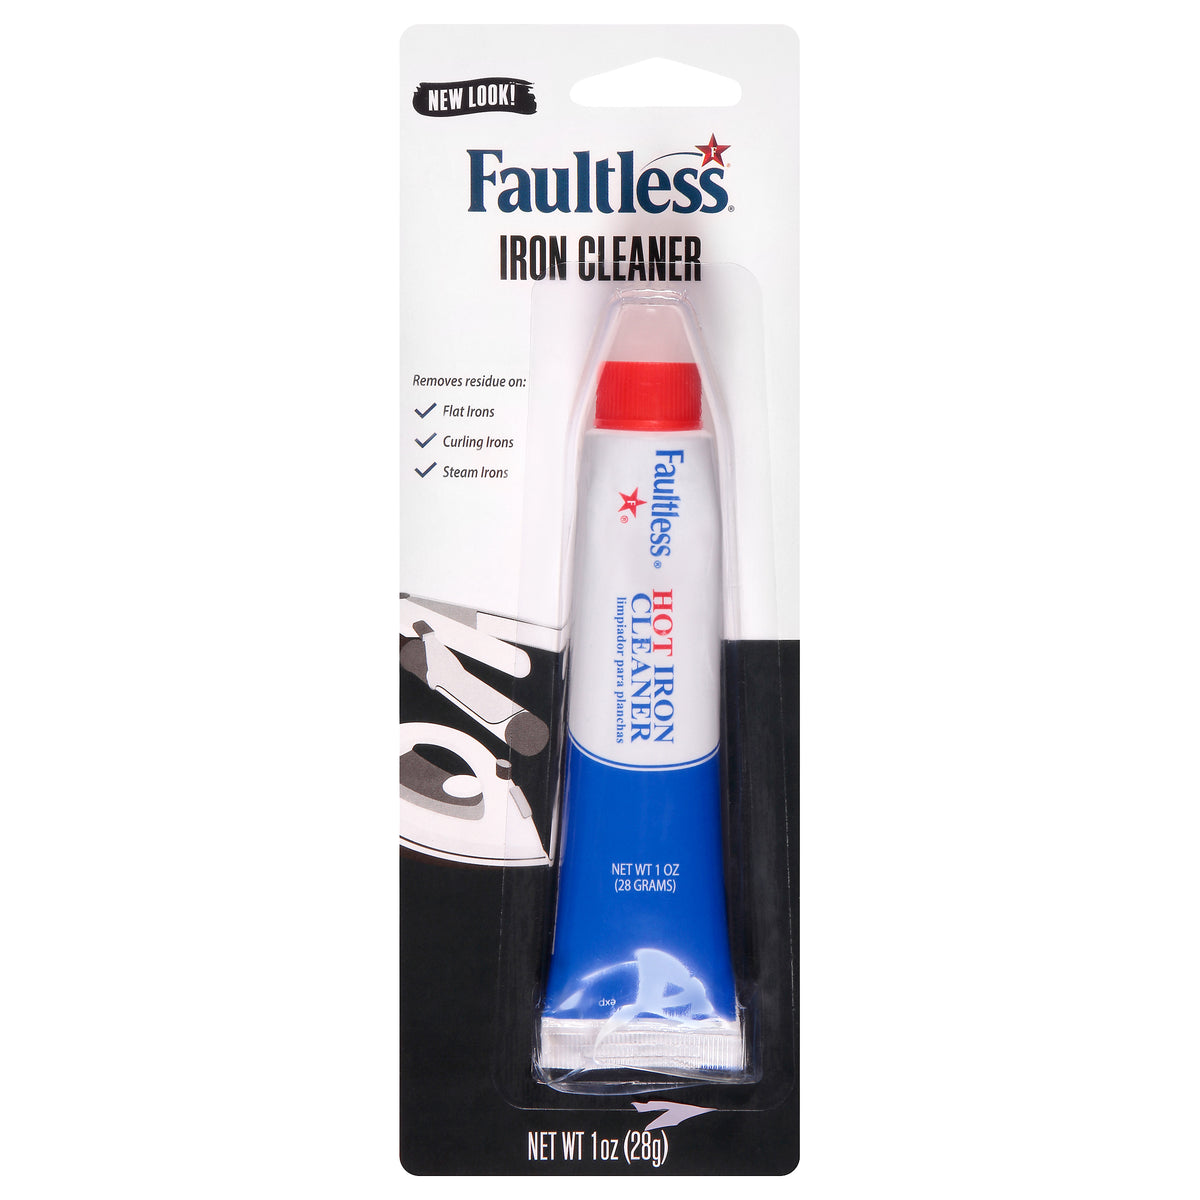 Faultless Hot Iron Cleaner, 2 Count 